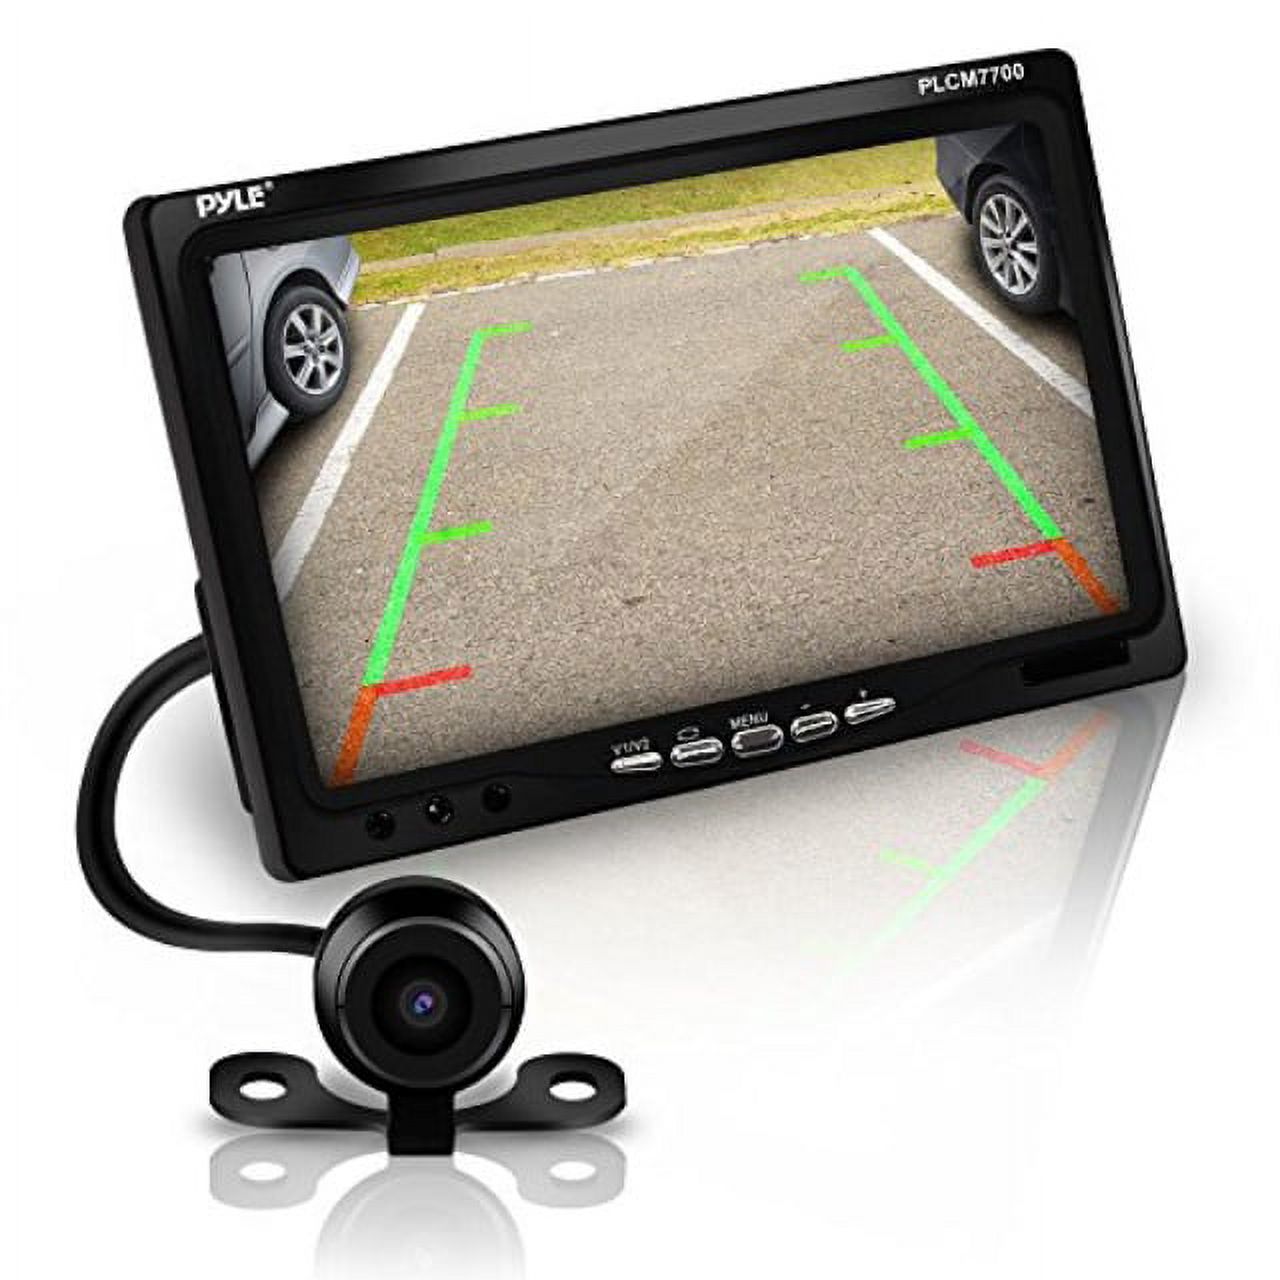 Pyle Backup Rear View Car Camera Screen Monitor System - Parking & Reverse Safety Distance Scale Lines, Waterproof, Night Vision, 170?? View Angle, 7" LCD Video Color Display for Vehicles - (PLCM7 - image 1 of 3